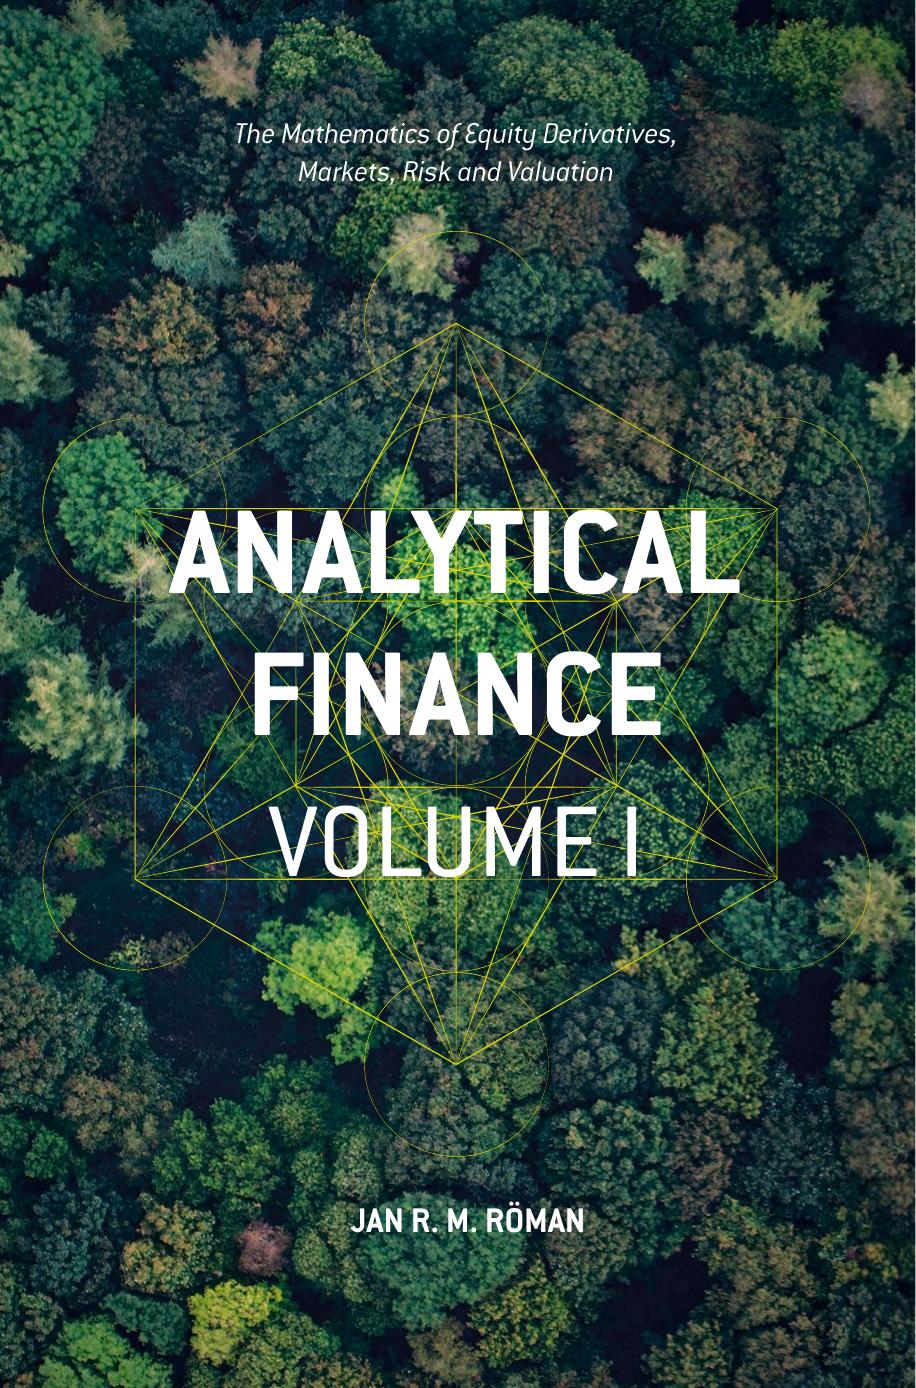 Analytical Finance Volume I The Mathematics of Equity Derivatives, Markets, Risk and Valuation 2017 PDF